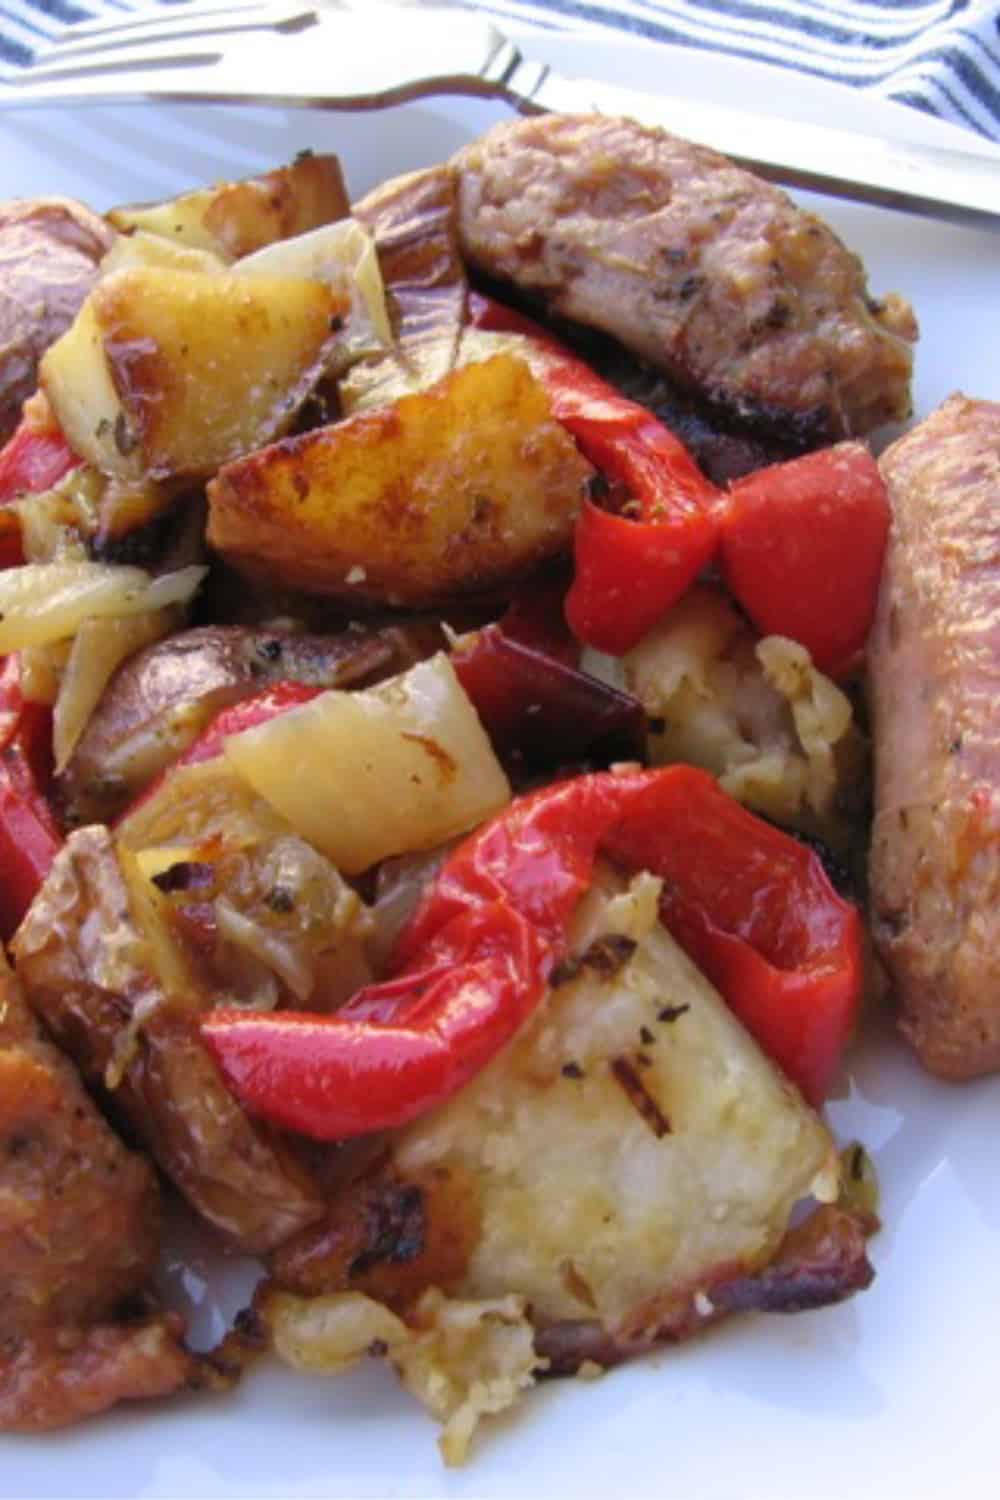 Sausage, peppers, onions and potatoes up close on white plate.